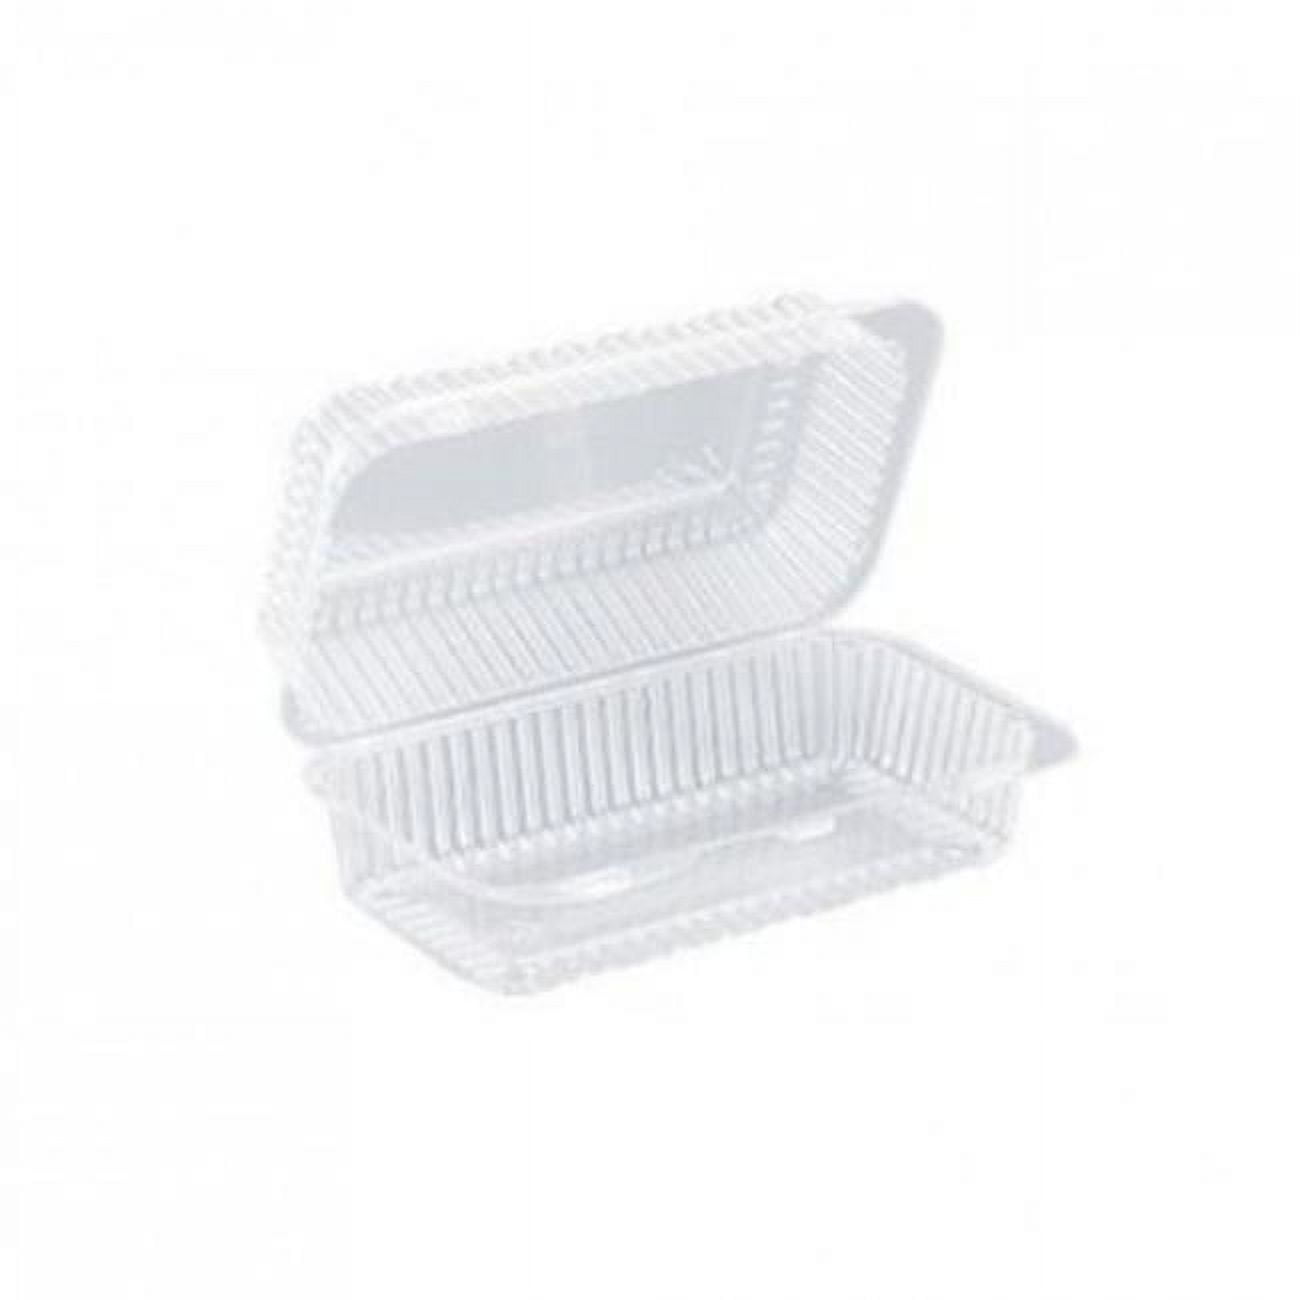 Slp35 Cpc 56 Oz Hinged Container Pet - Clear, Case Of 500